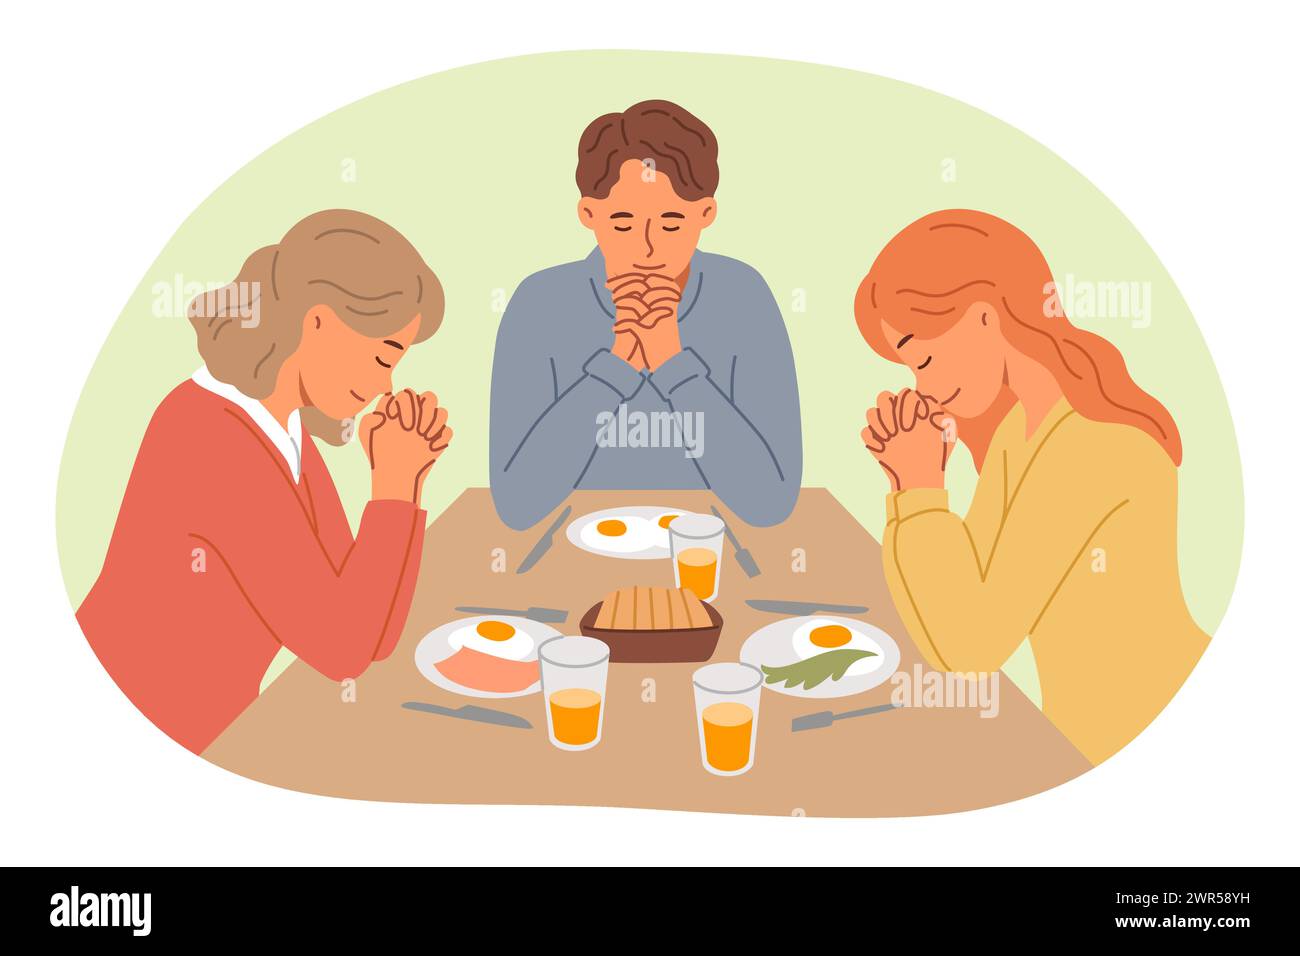 Lunchtime prayer from catholic family thanking god for presence of food on table Stock Vector